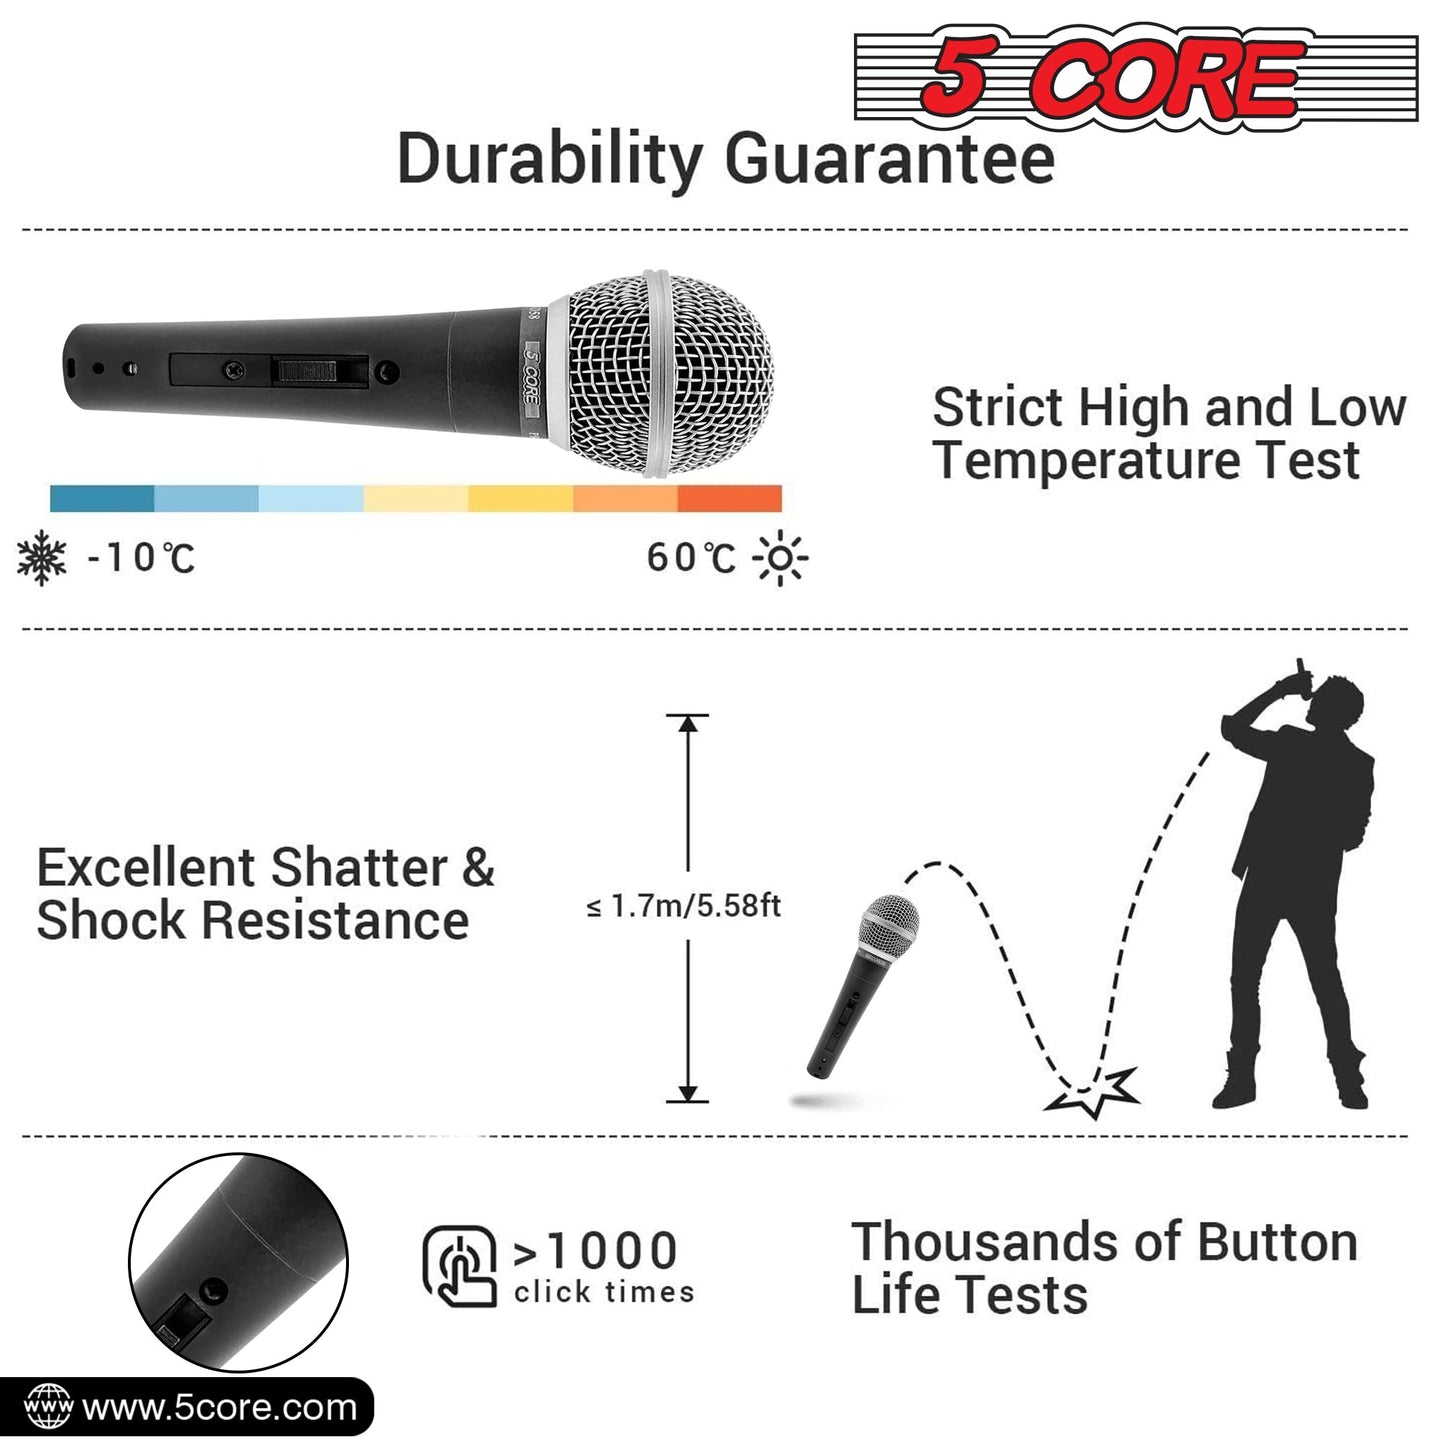 The 5 Core Premium Vocal Dynamic Cardioid Handheld Microphone and Stand combo offers high-quality audio support for karaoke singing and other activities MS DBL+ND58+ND57-10